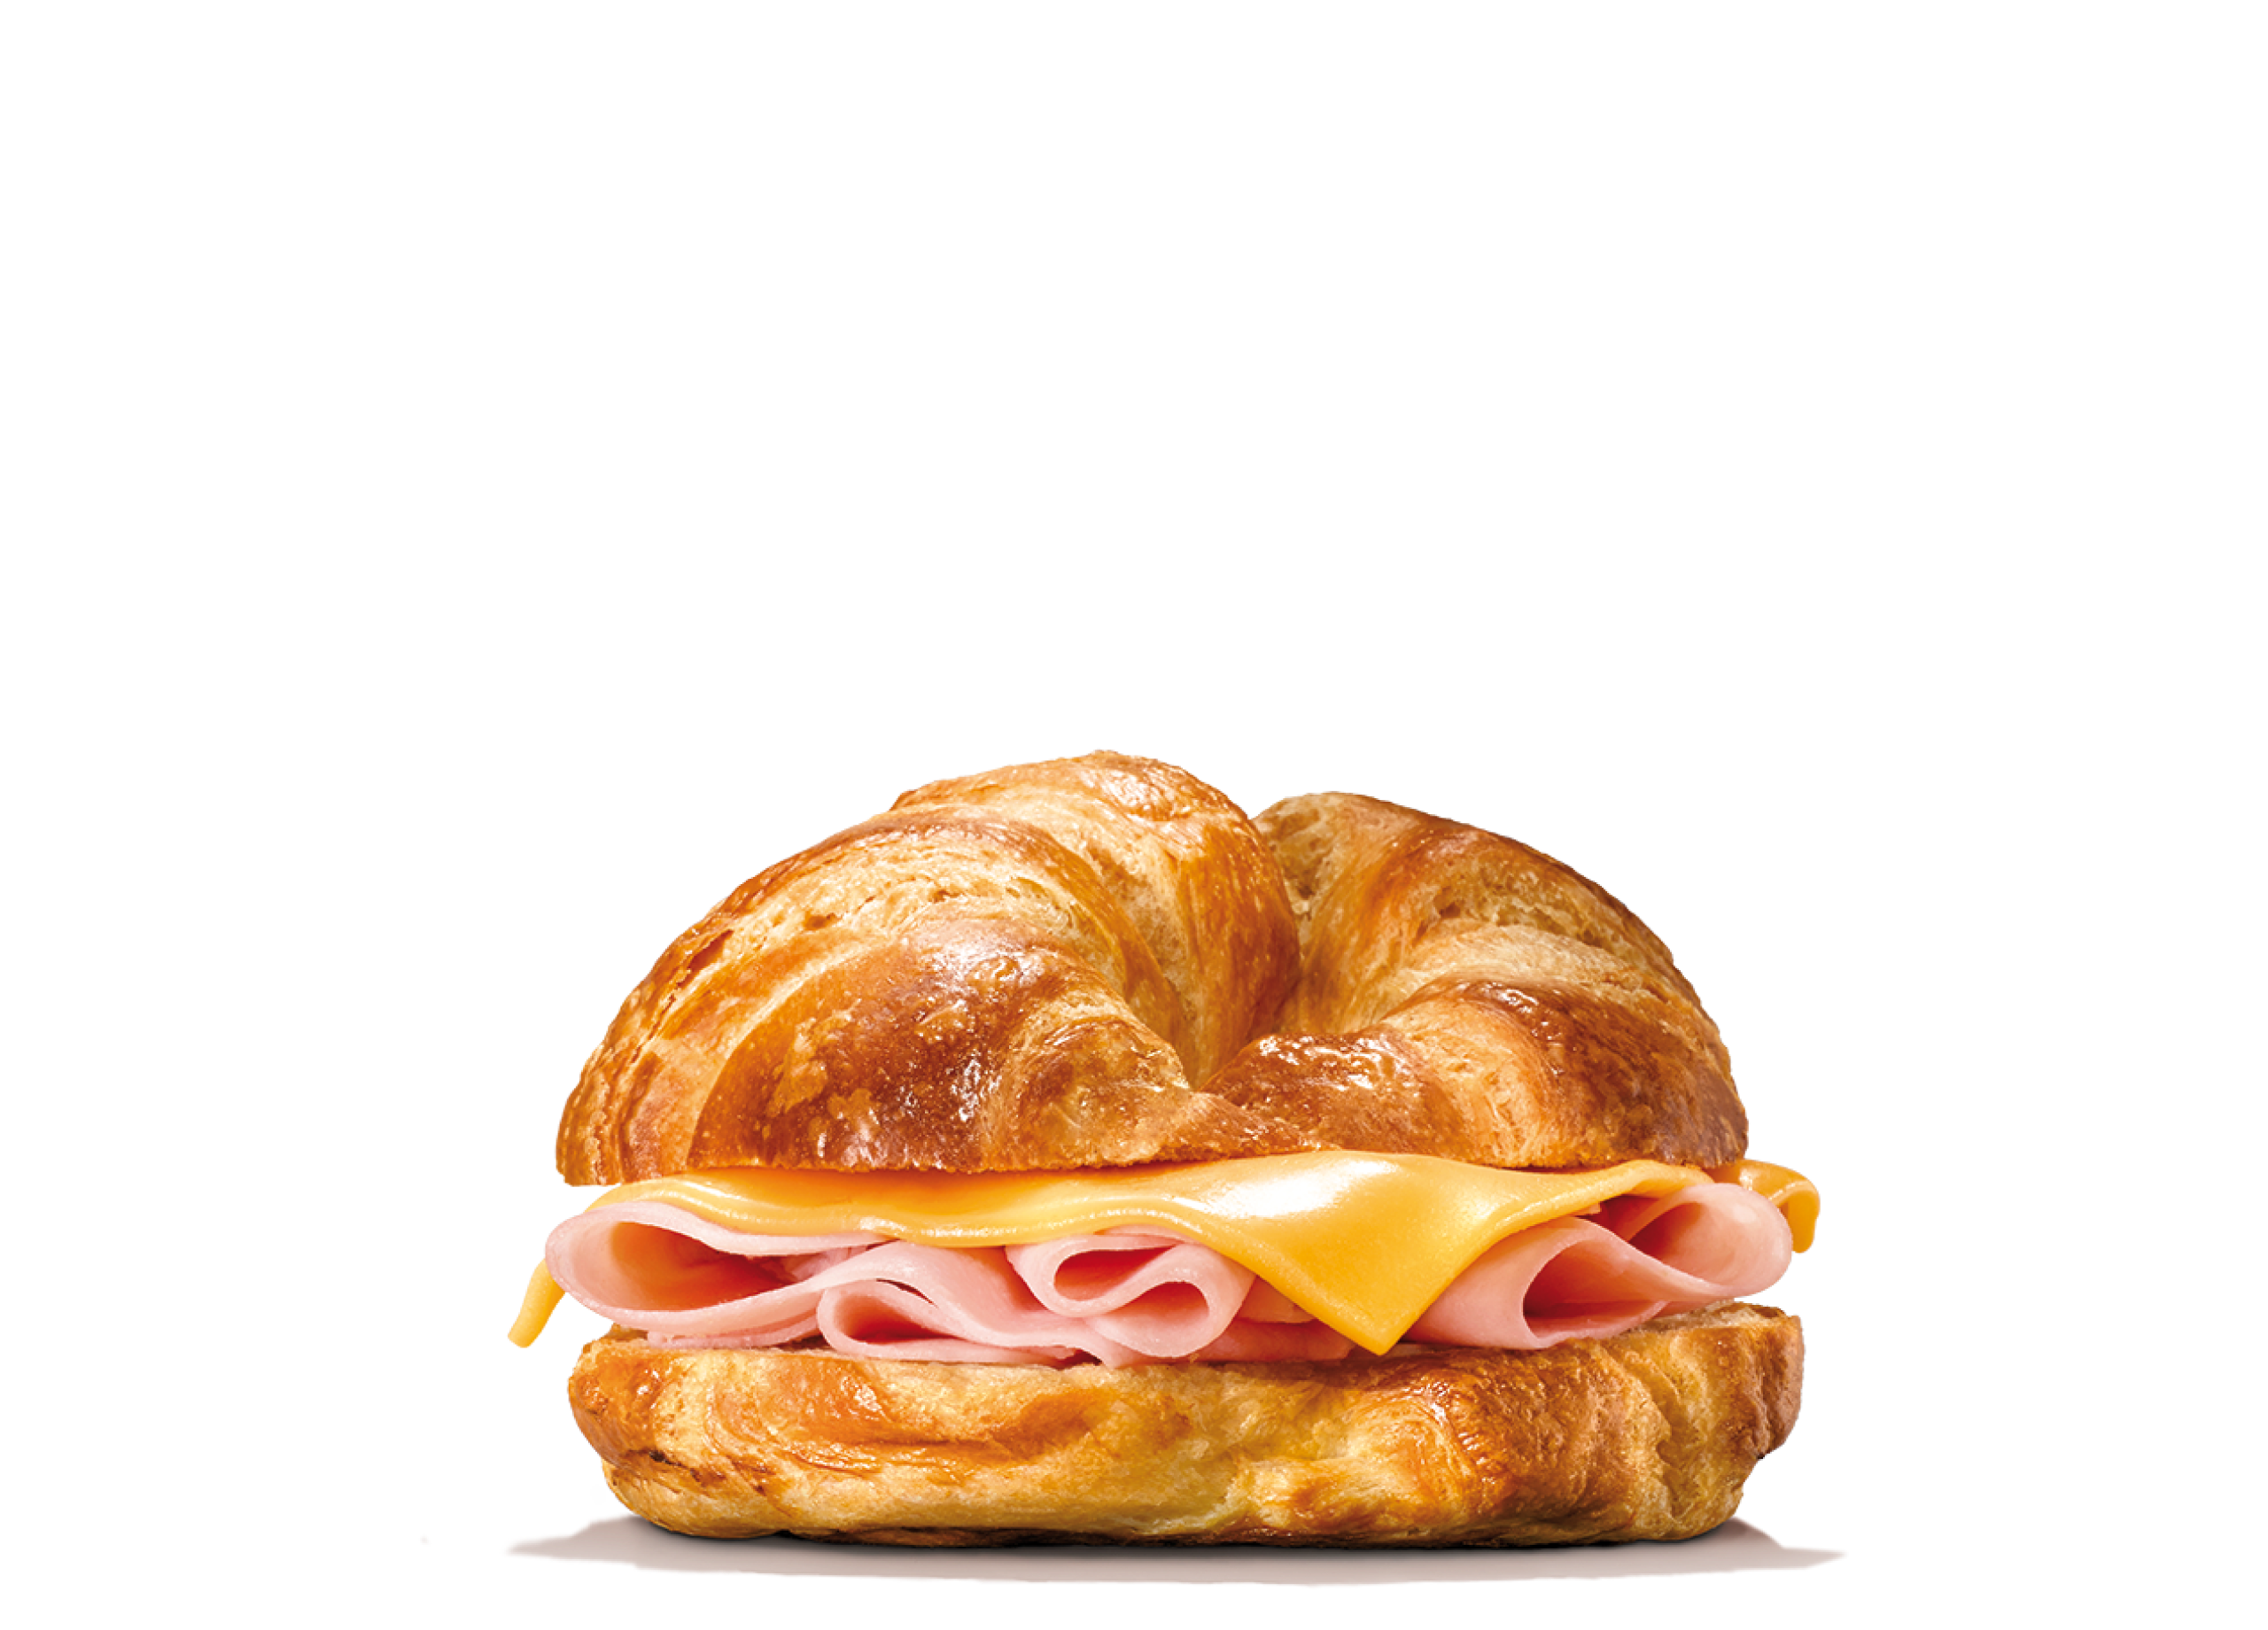 Croissant Jamón y Queso
